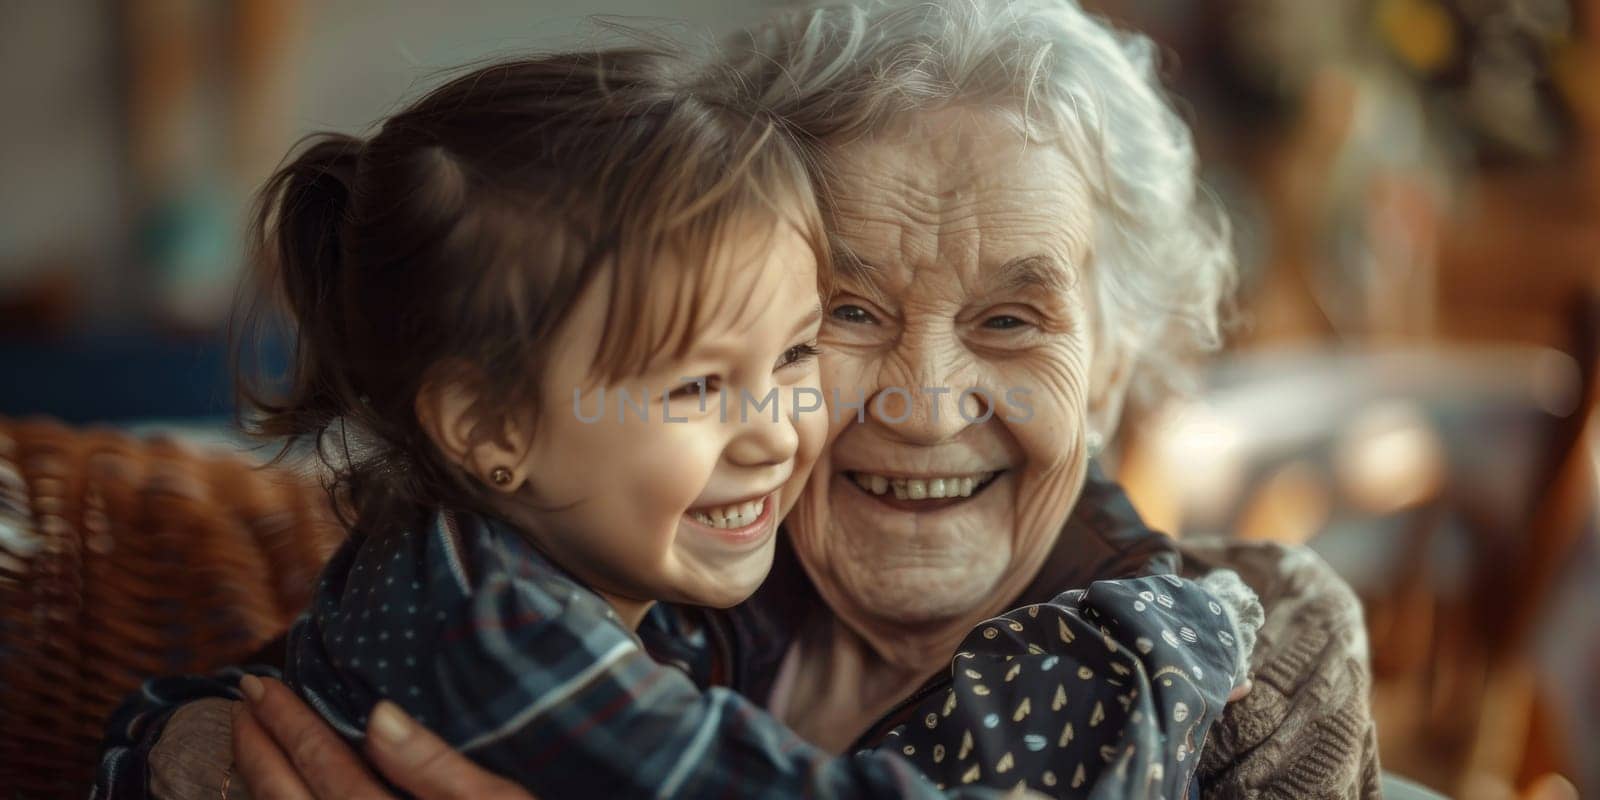 Capture the heartwarming moment of a young child visiting an elderly relative in a nursing home by Kadula